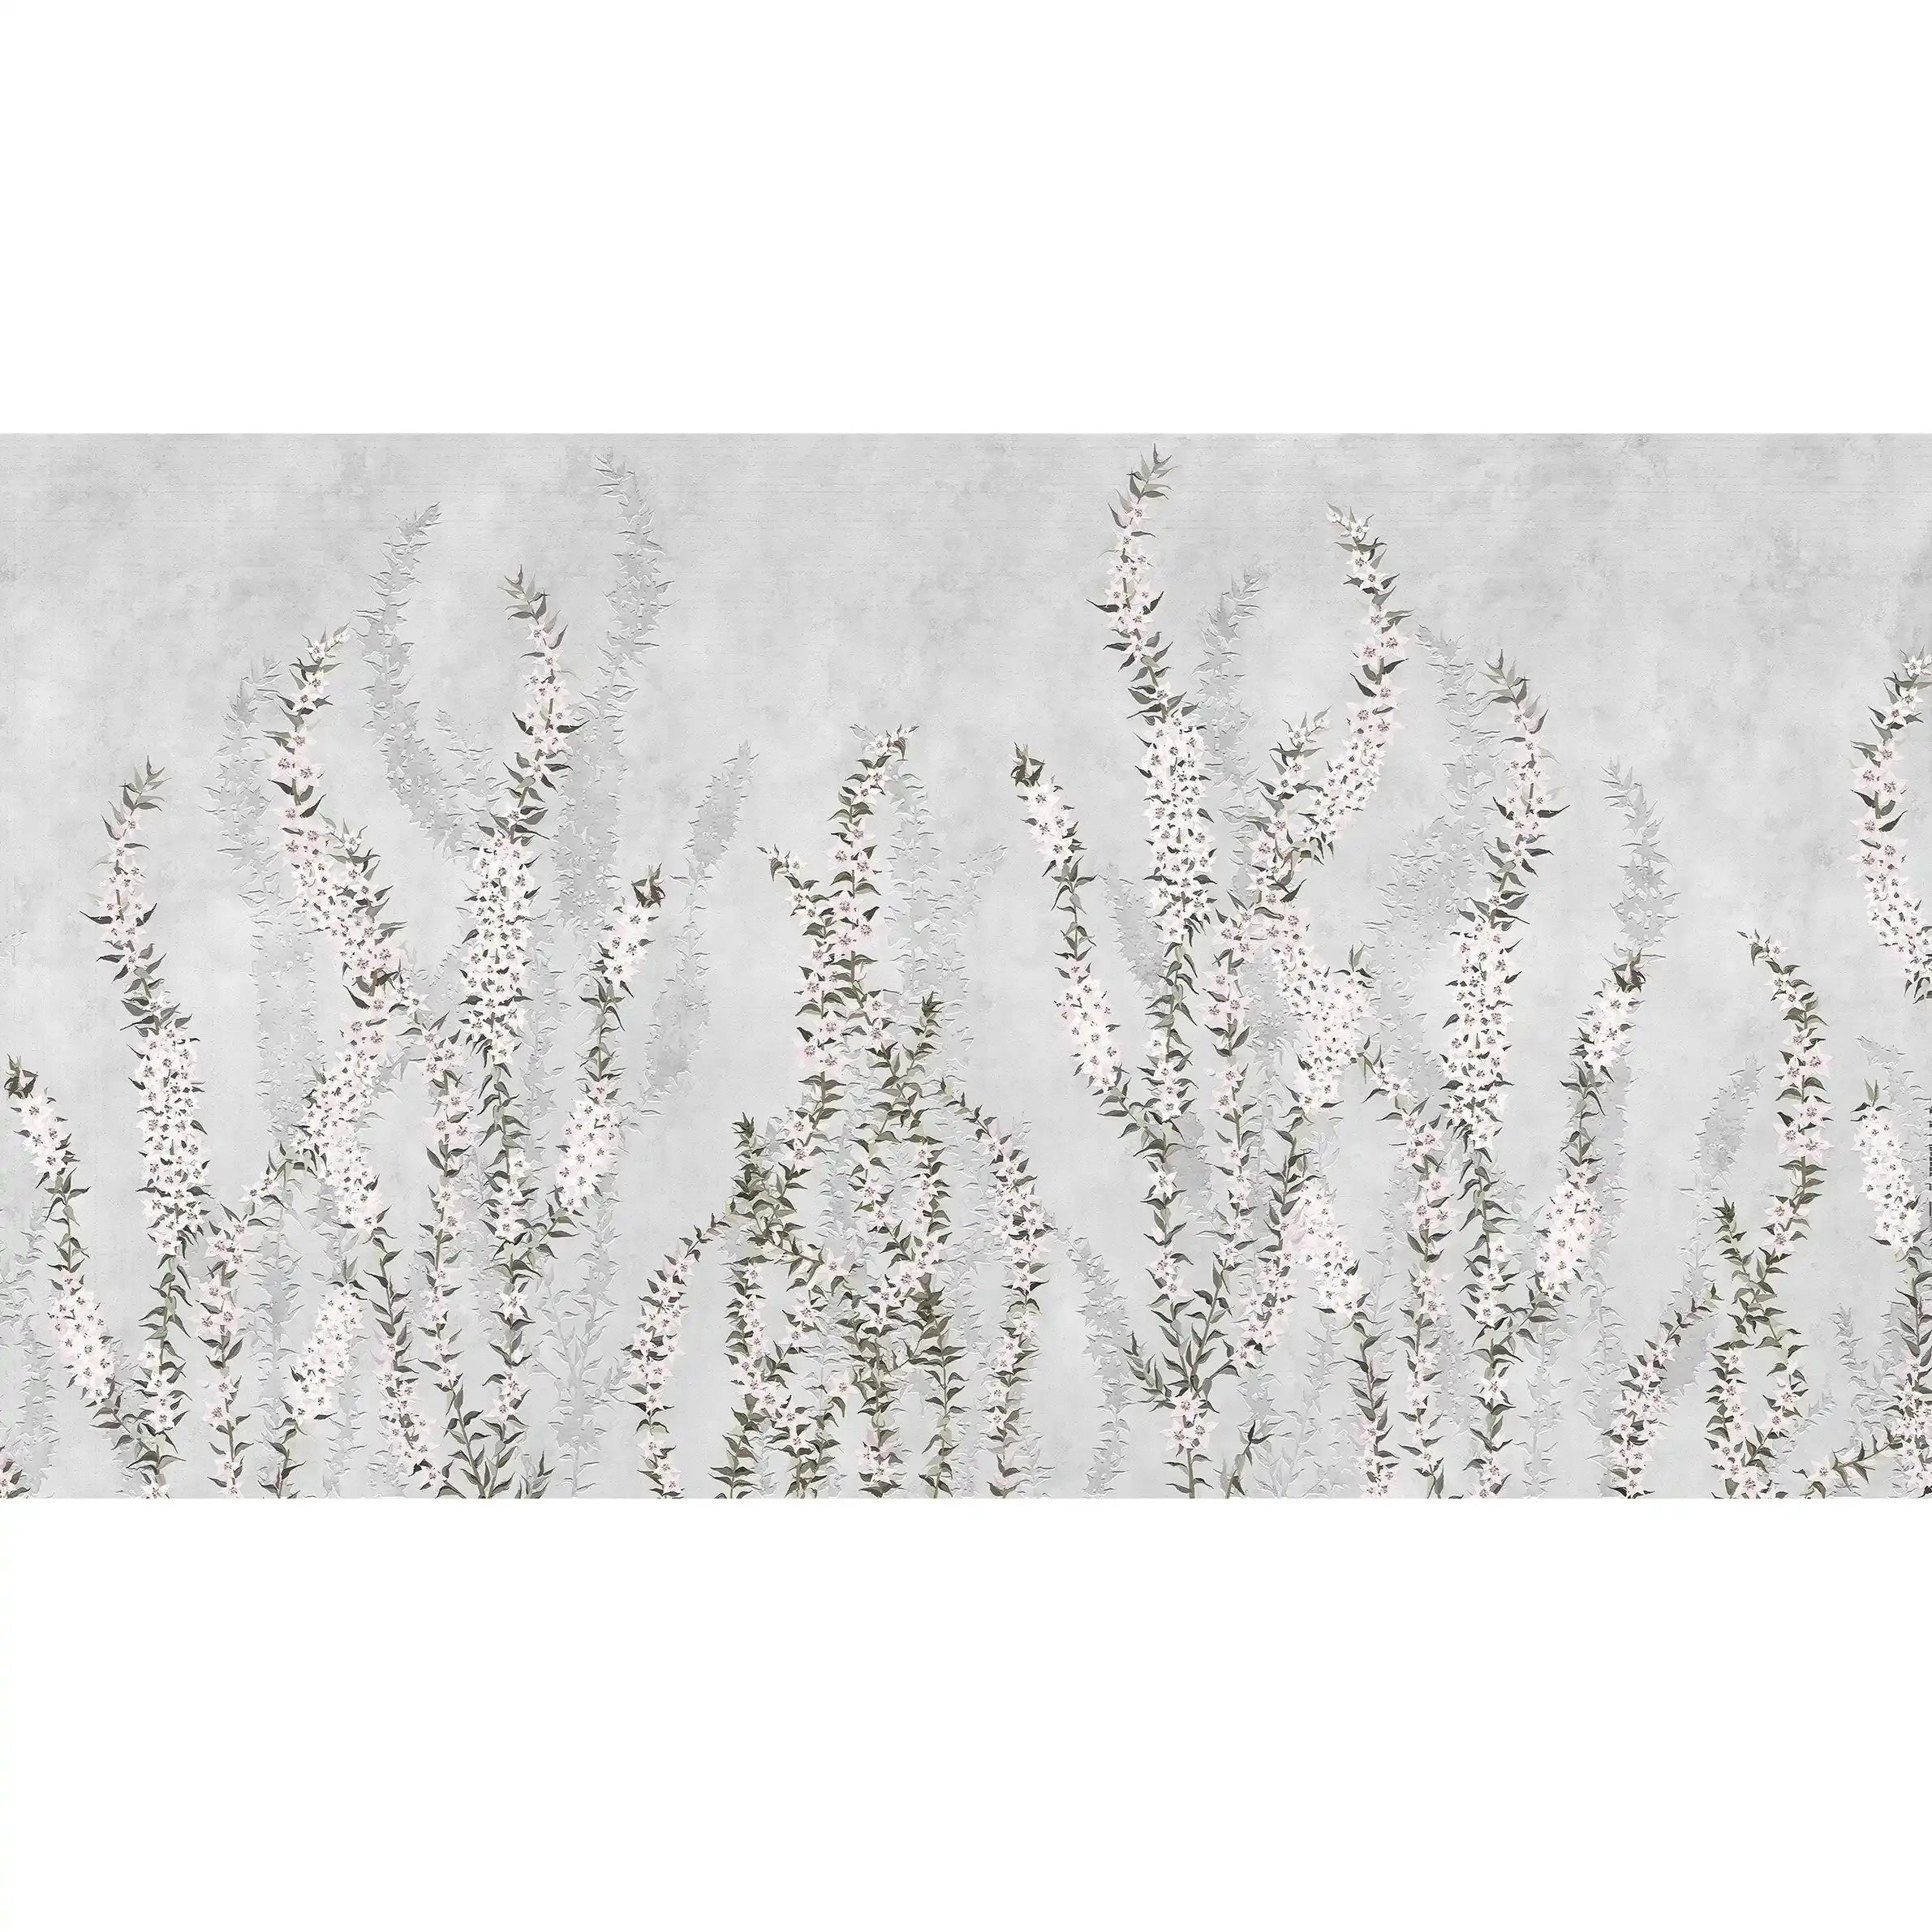 3023-D / Modern Grey Paisley Wallpaper, Adhesive Peel and Stick, Temporary Wallpaper for Home Decor - Artevella